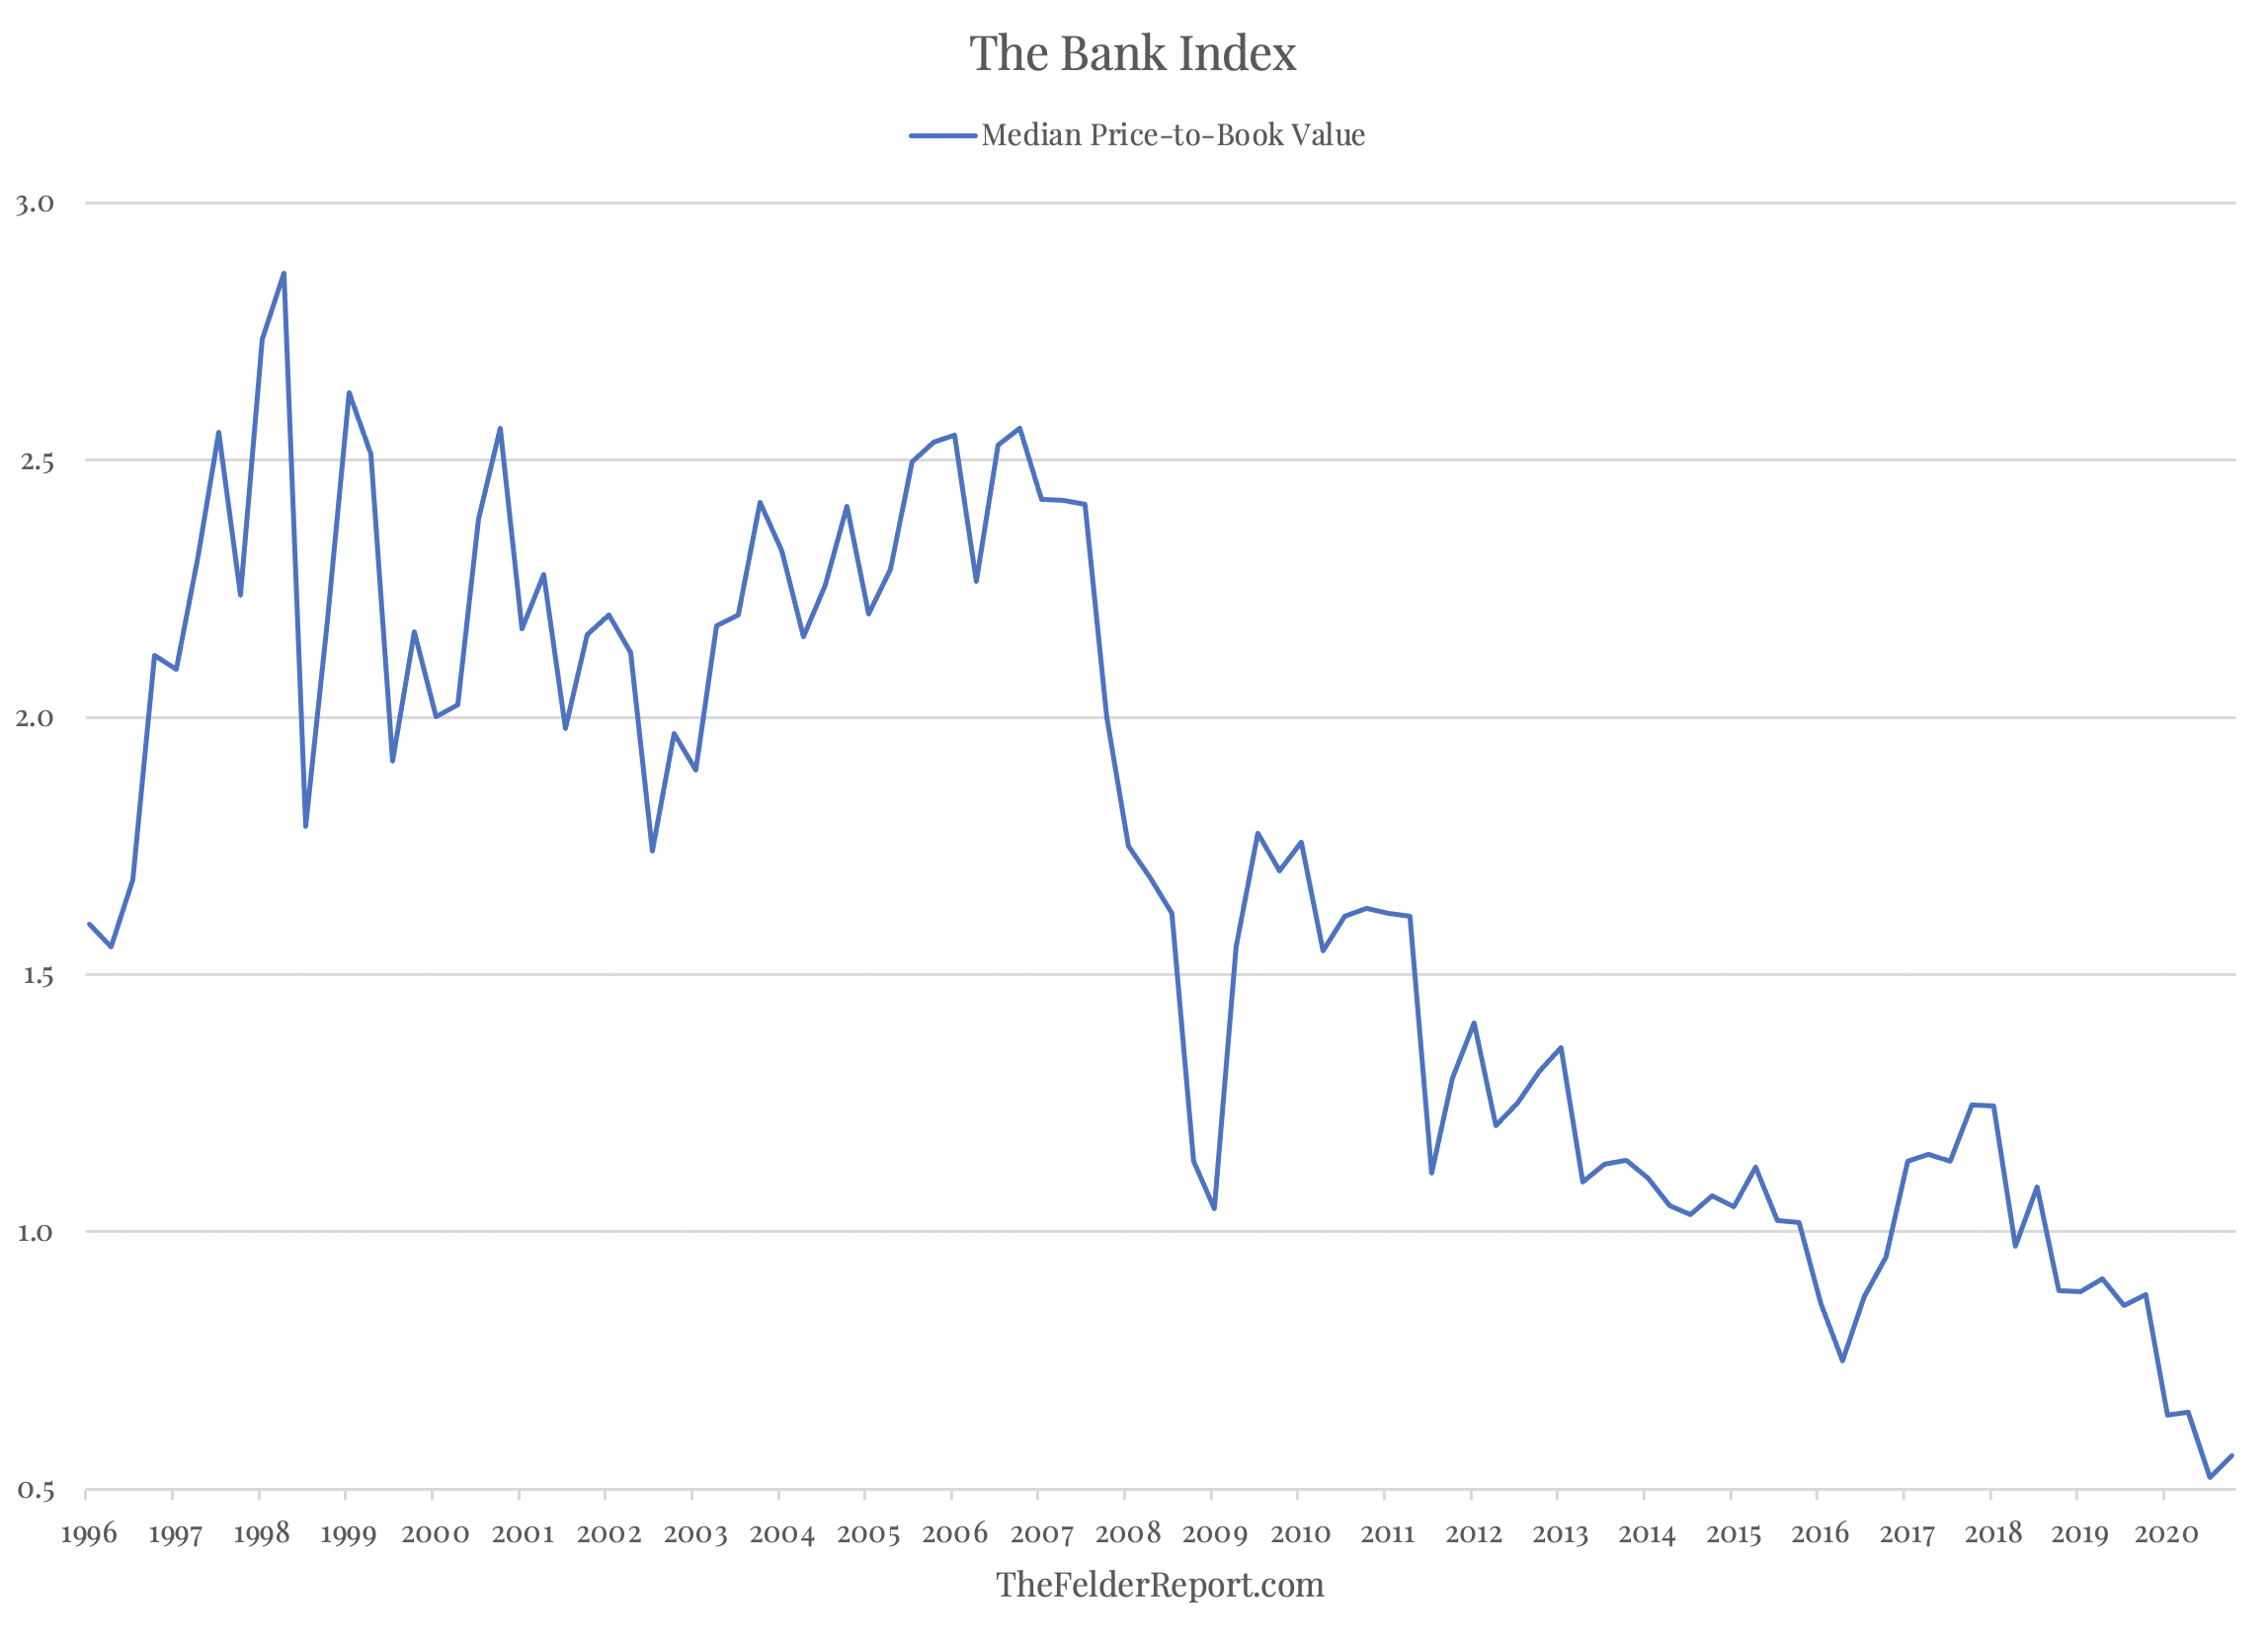 The Bank Index